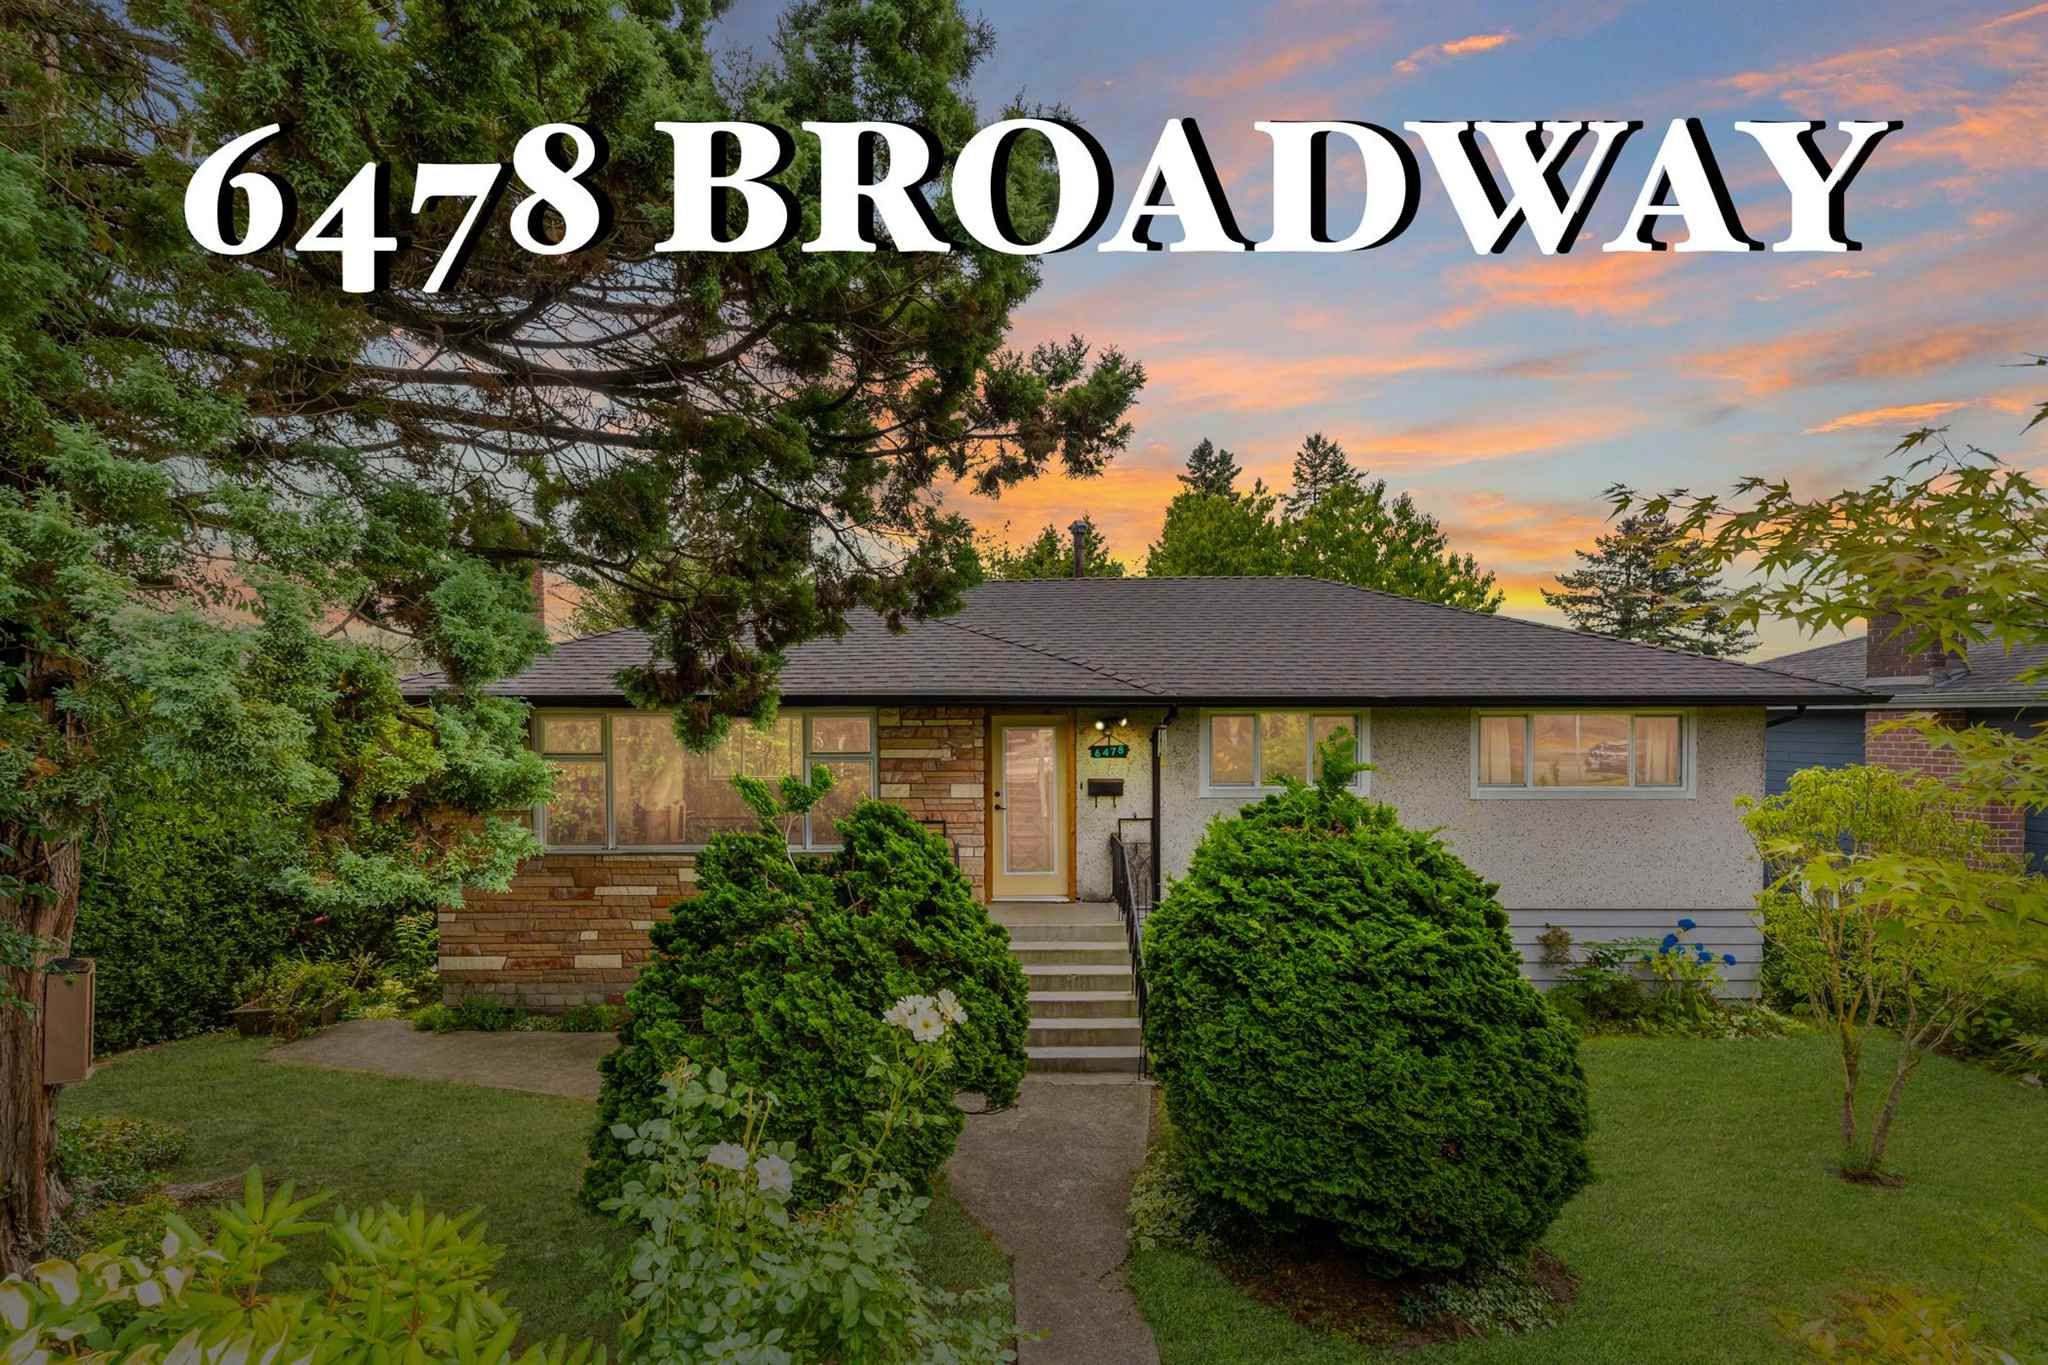 Main Photo: 6478 BROADWAY STREET in Burnaby: Parkcrest House for sale (Burnaby North)  : MLS®# R2601207